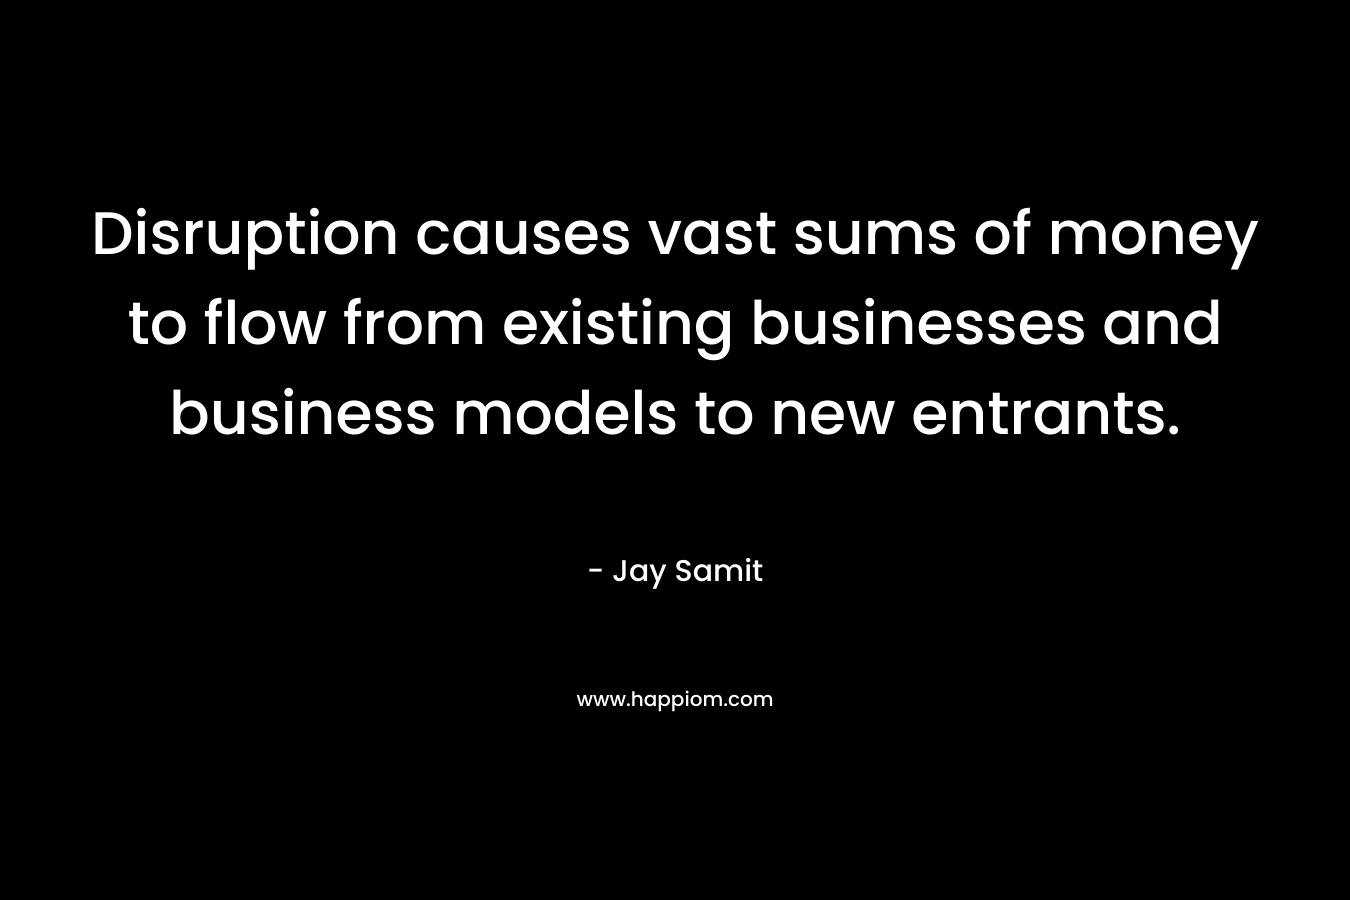 Disruption causes vast sums of money to flow from existing businesses and business models to new entrants.